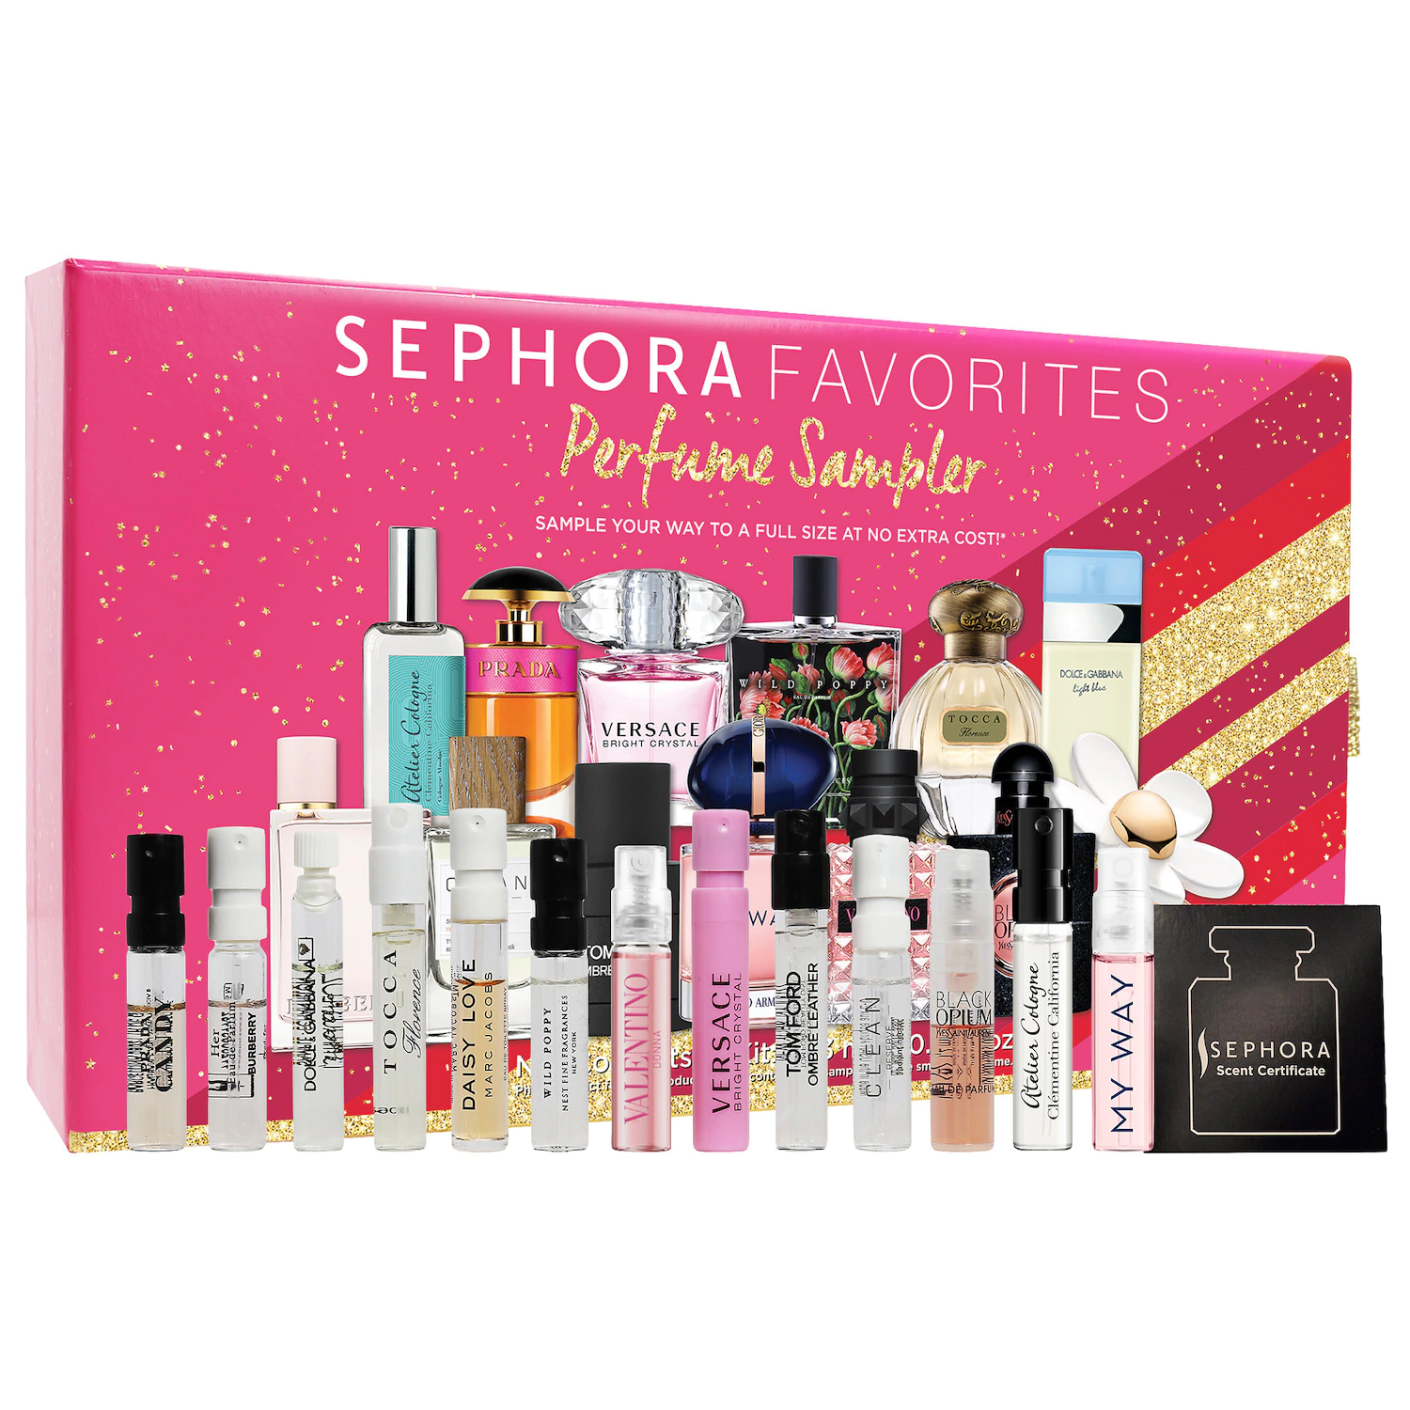 Sephora Favorites Holiday Perfume Sampler Set Available Now + Coupons! hello subscription